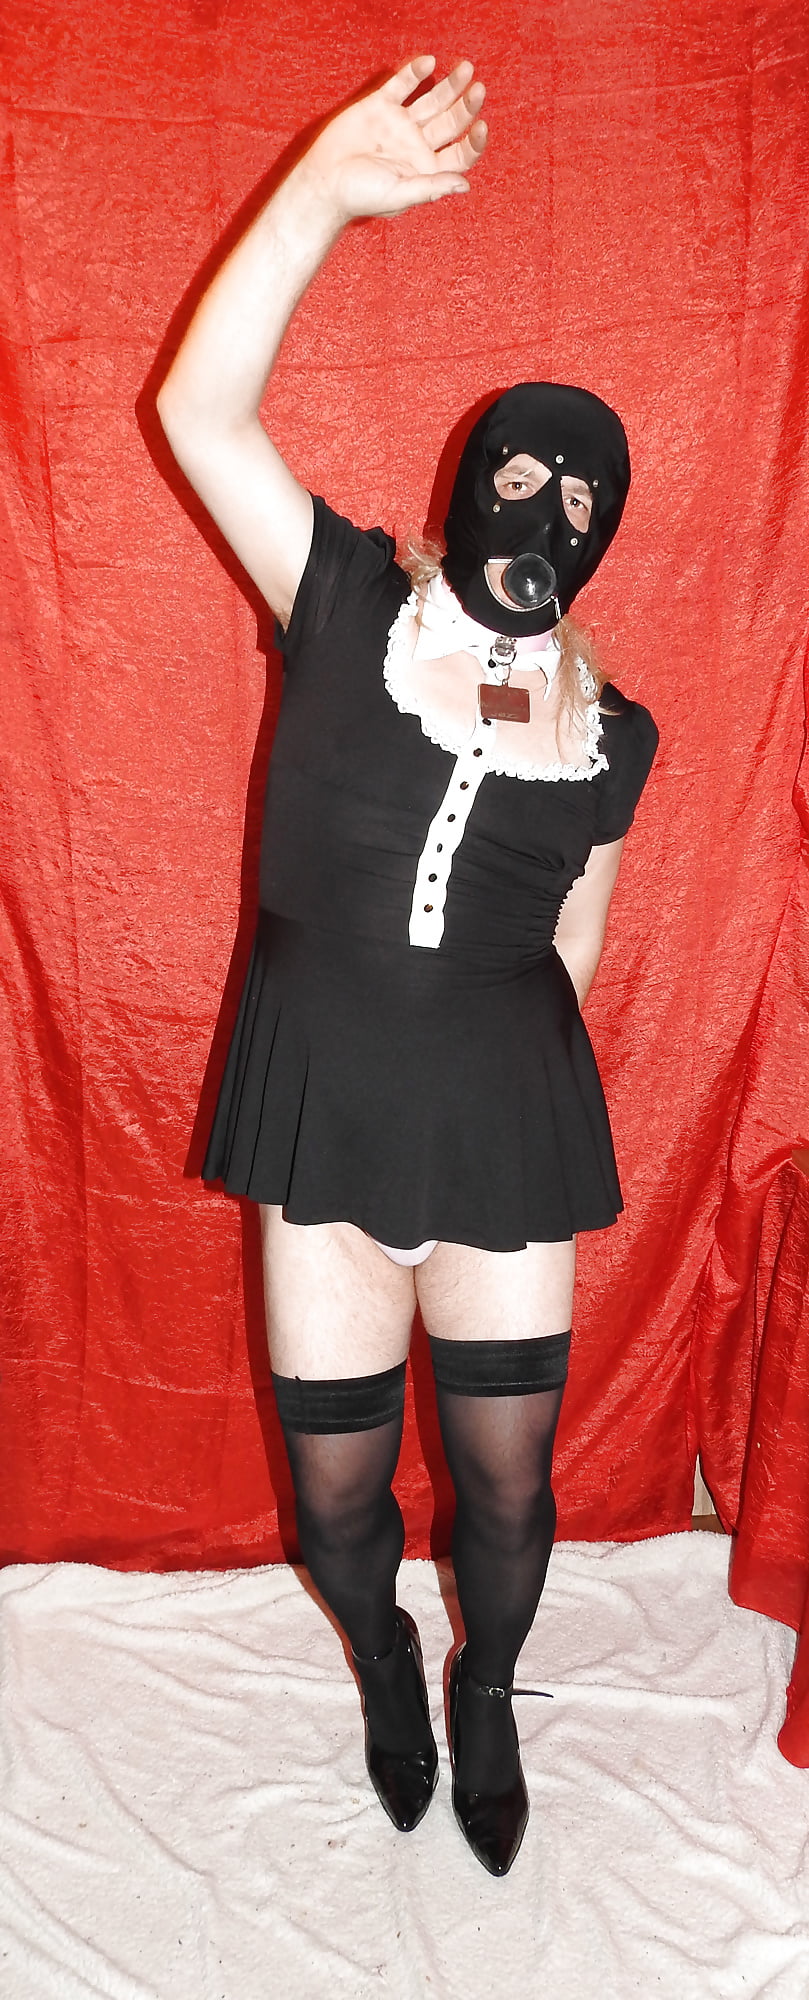 Task13 - Sissy Dance with Dildio in Mouth #107321024